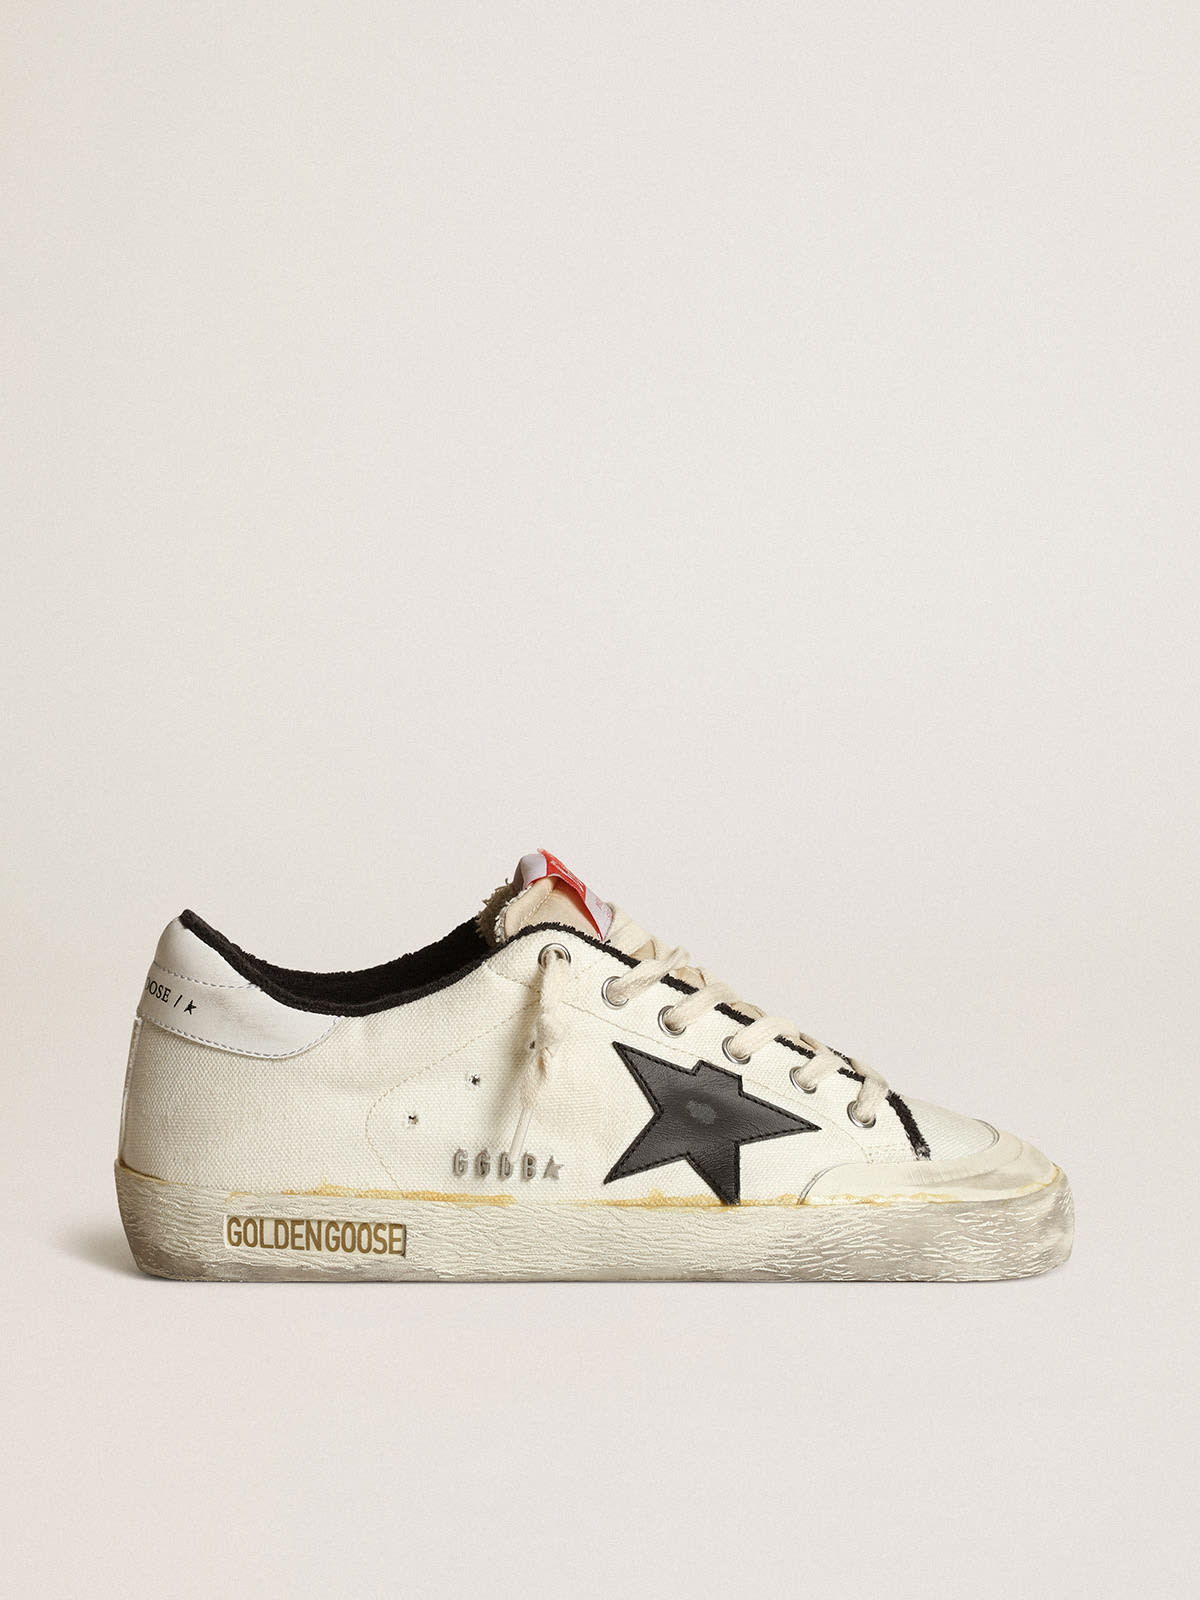 golden goose with tab heel leather and canvas black beige in sneakers LTD Women’s white star Super-Star